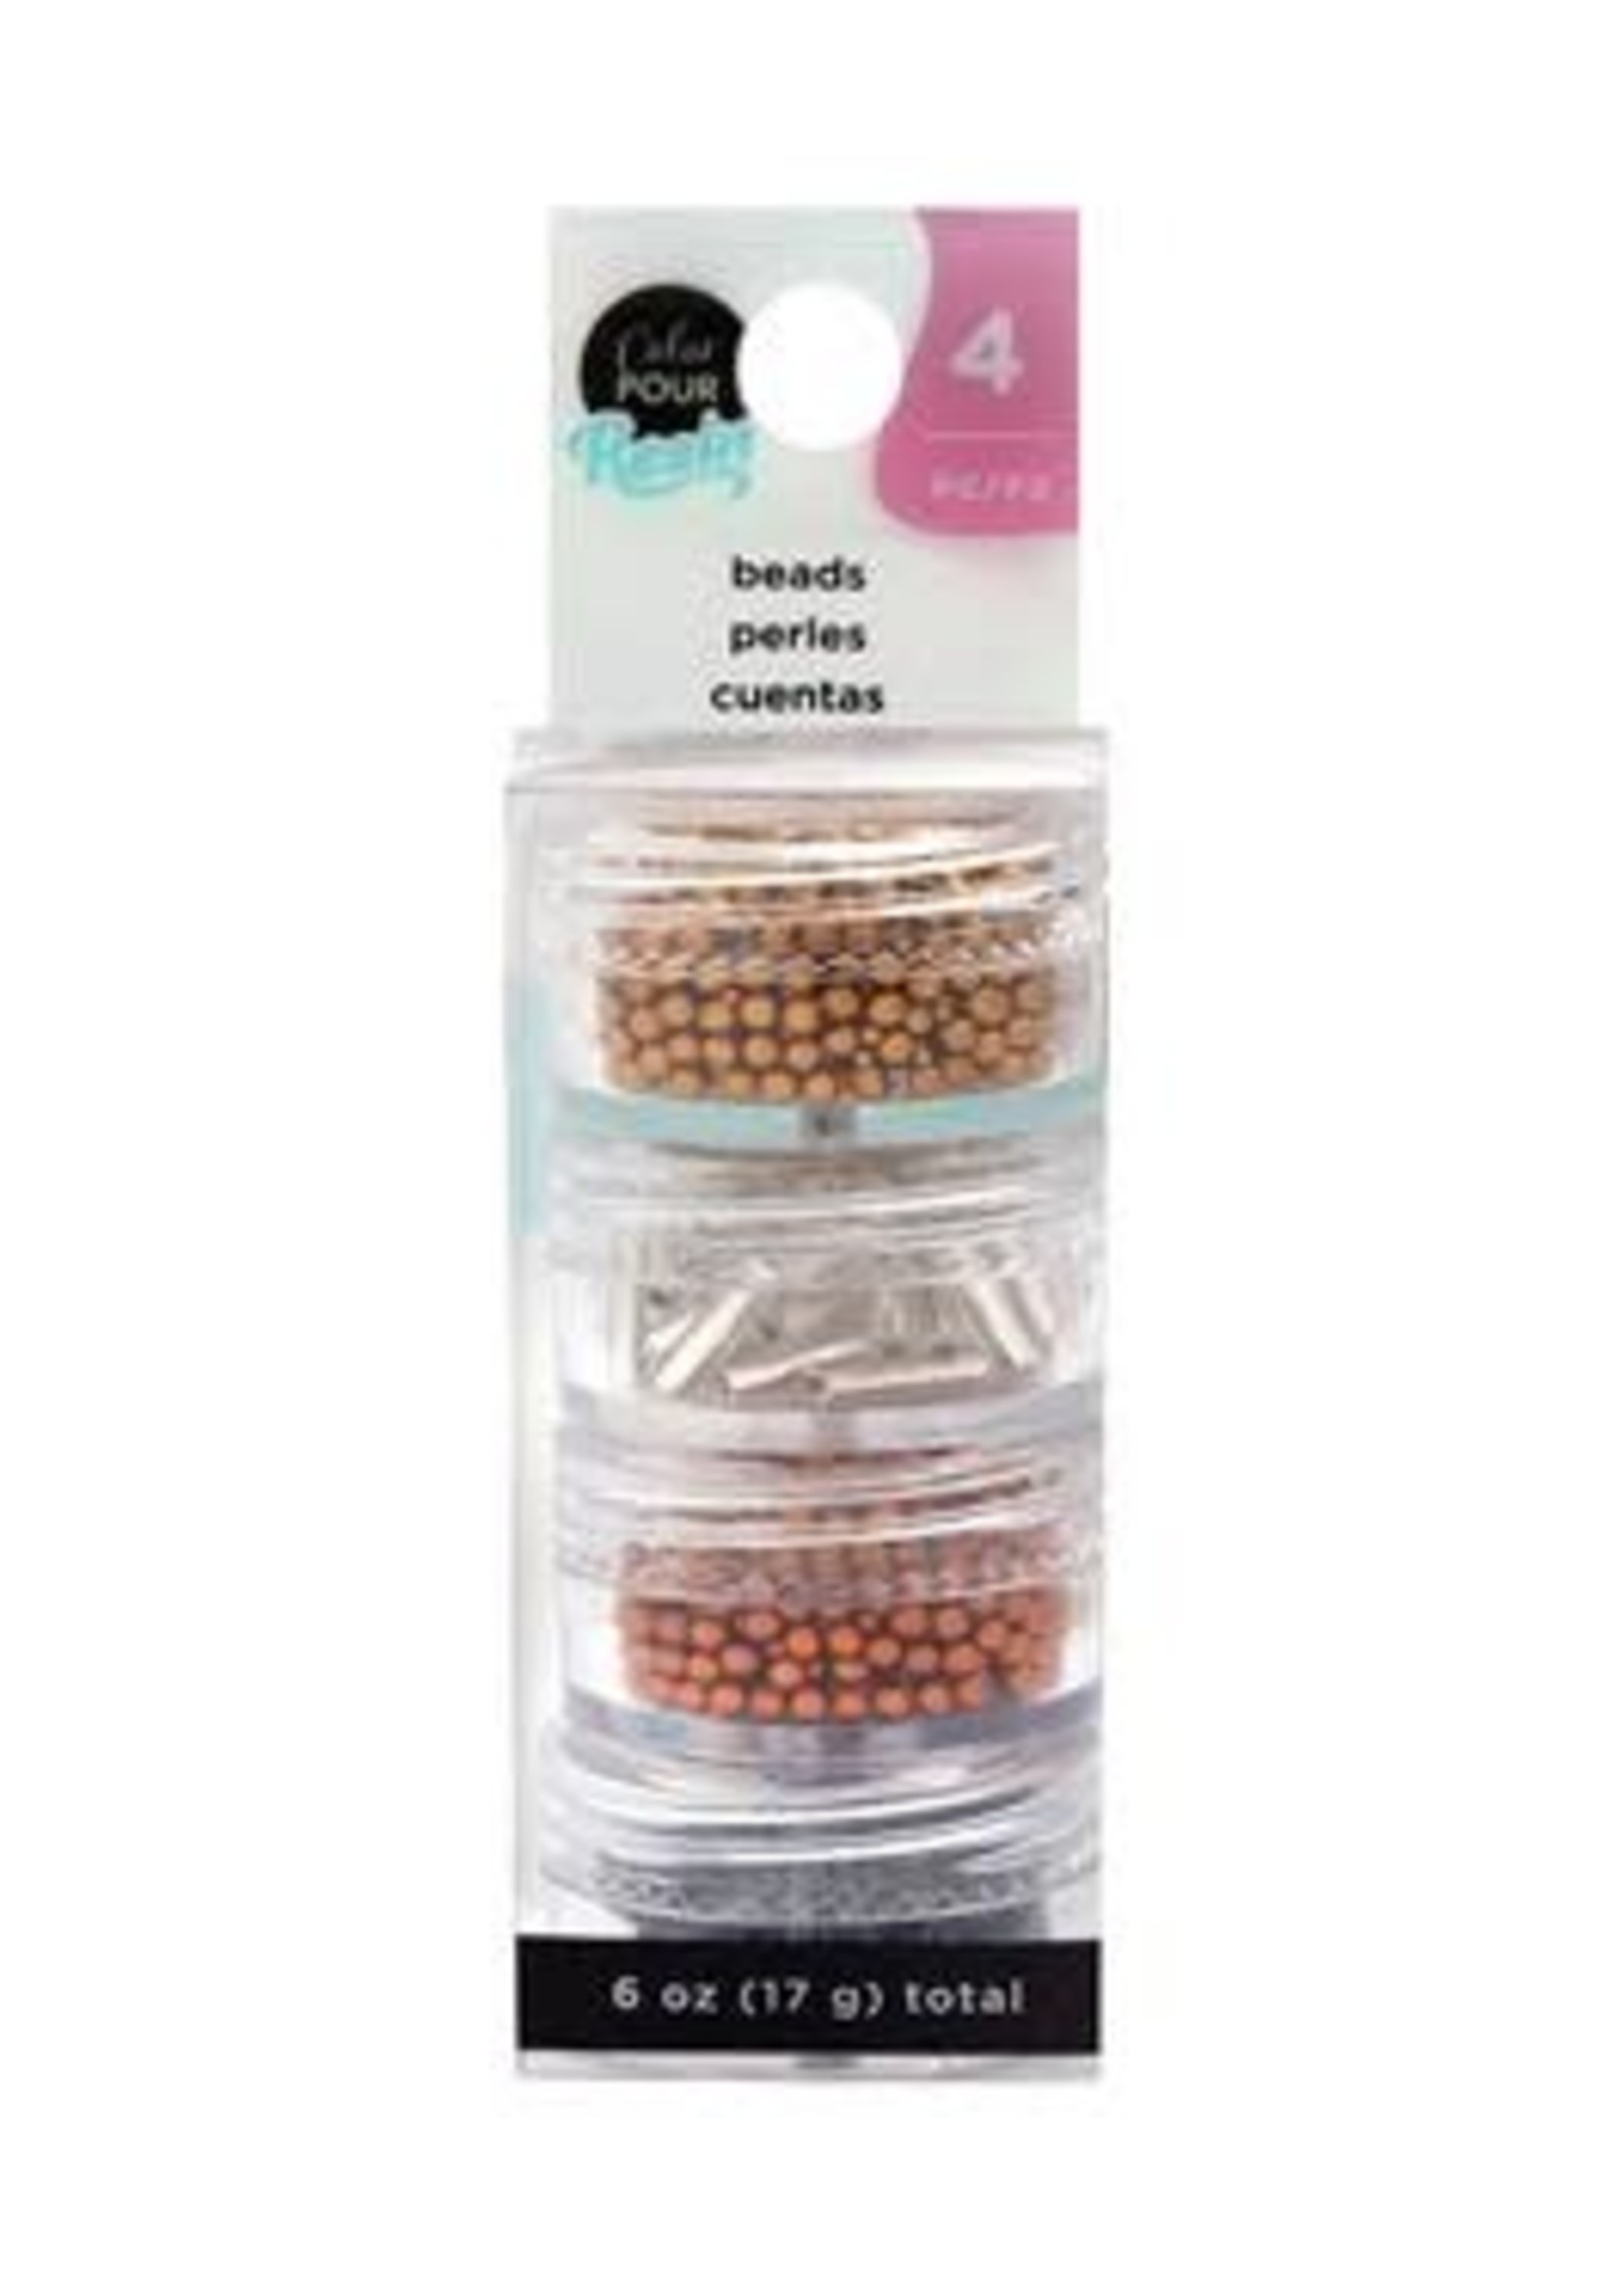 American Crafts Color Pour Resin Mix In Beads Metallic